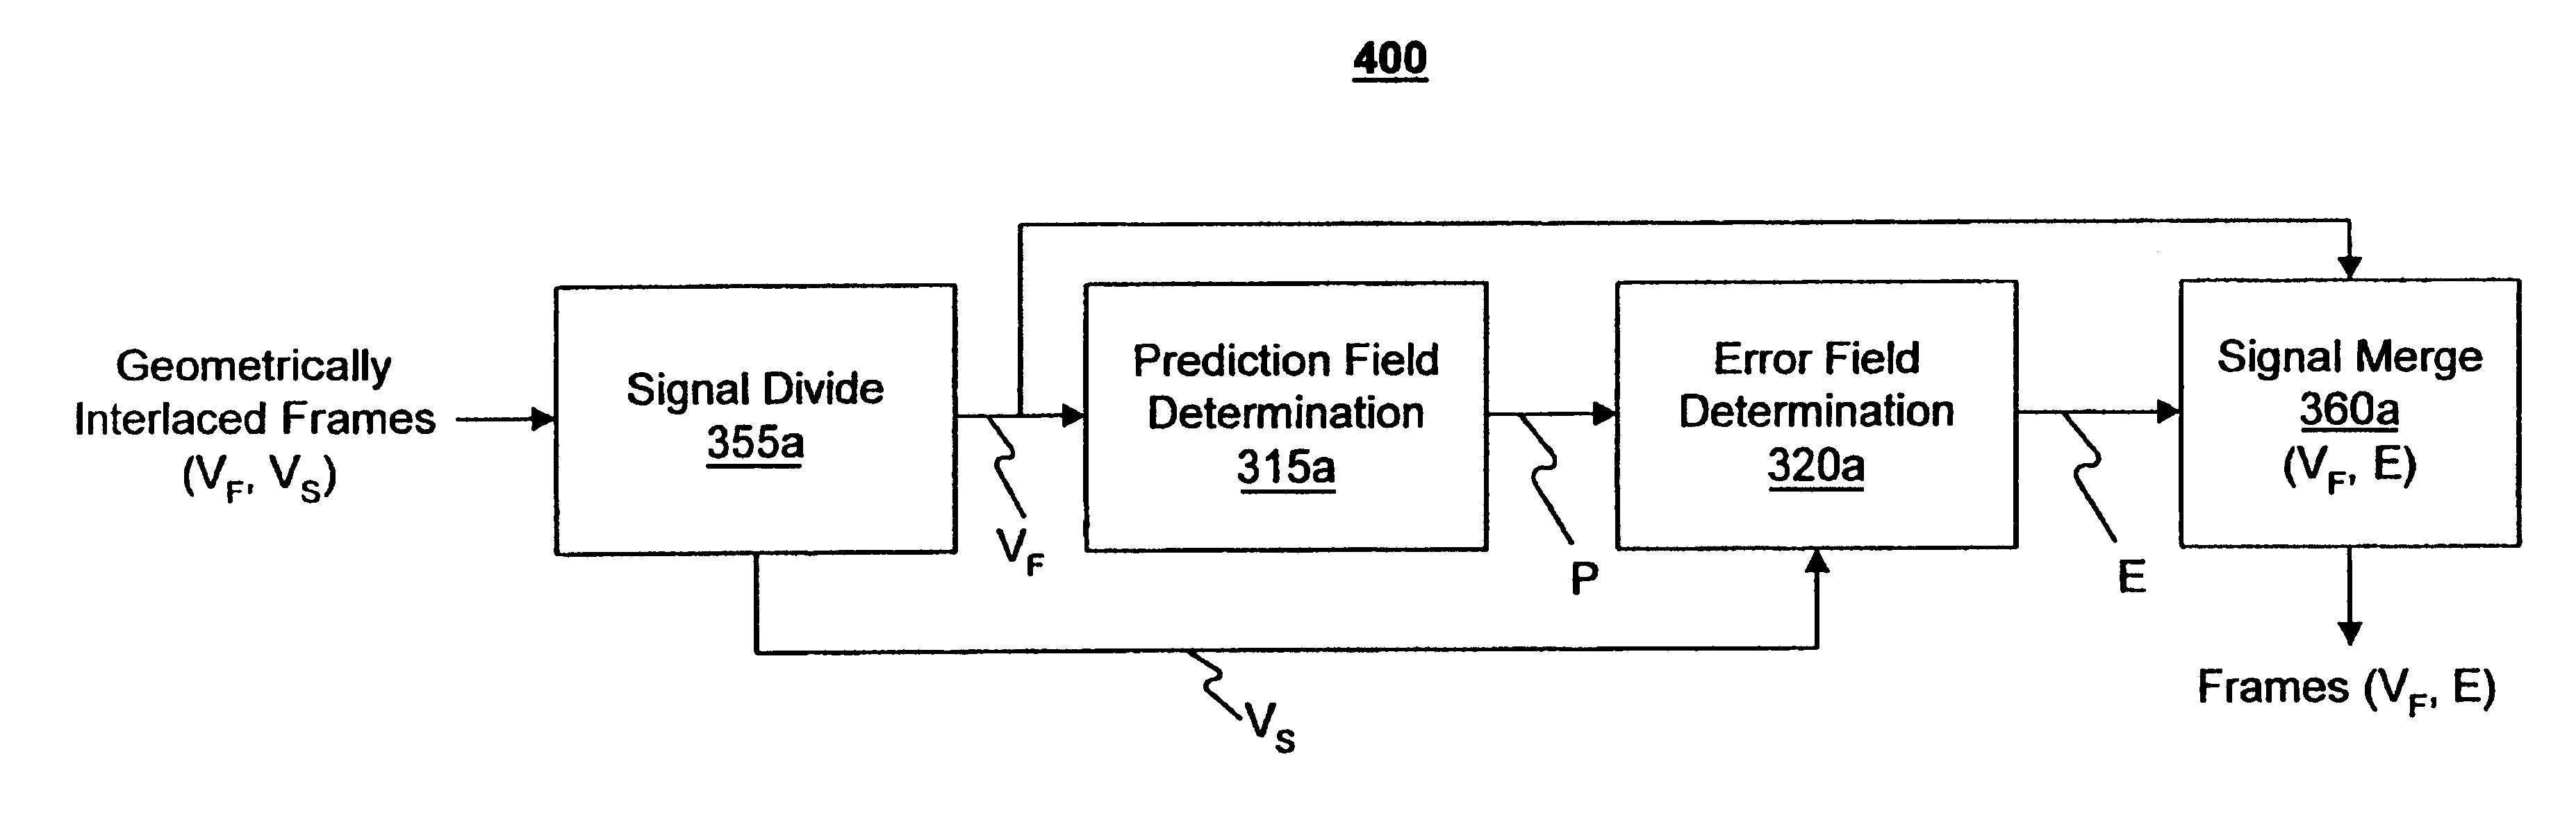 Apparatus and method for optimized compression of interlaced motion images